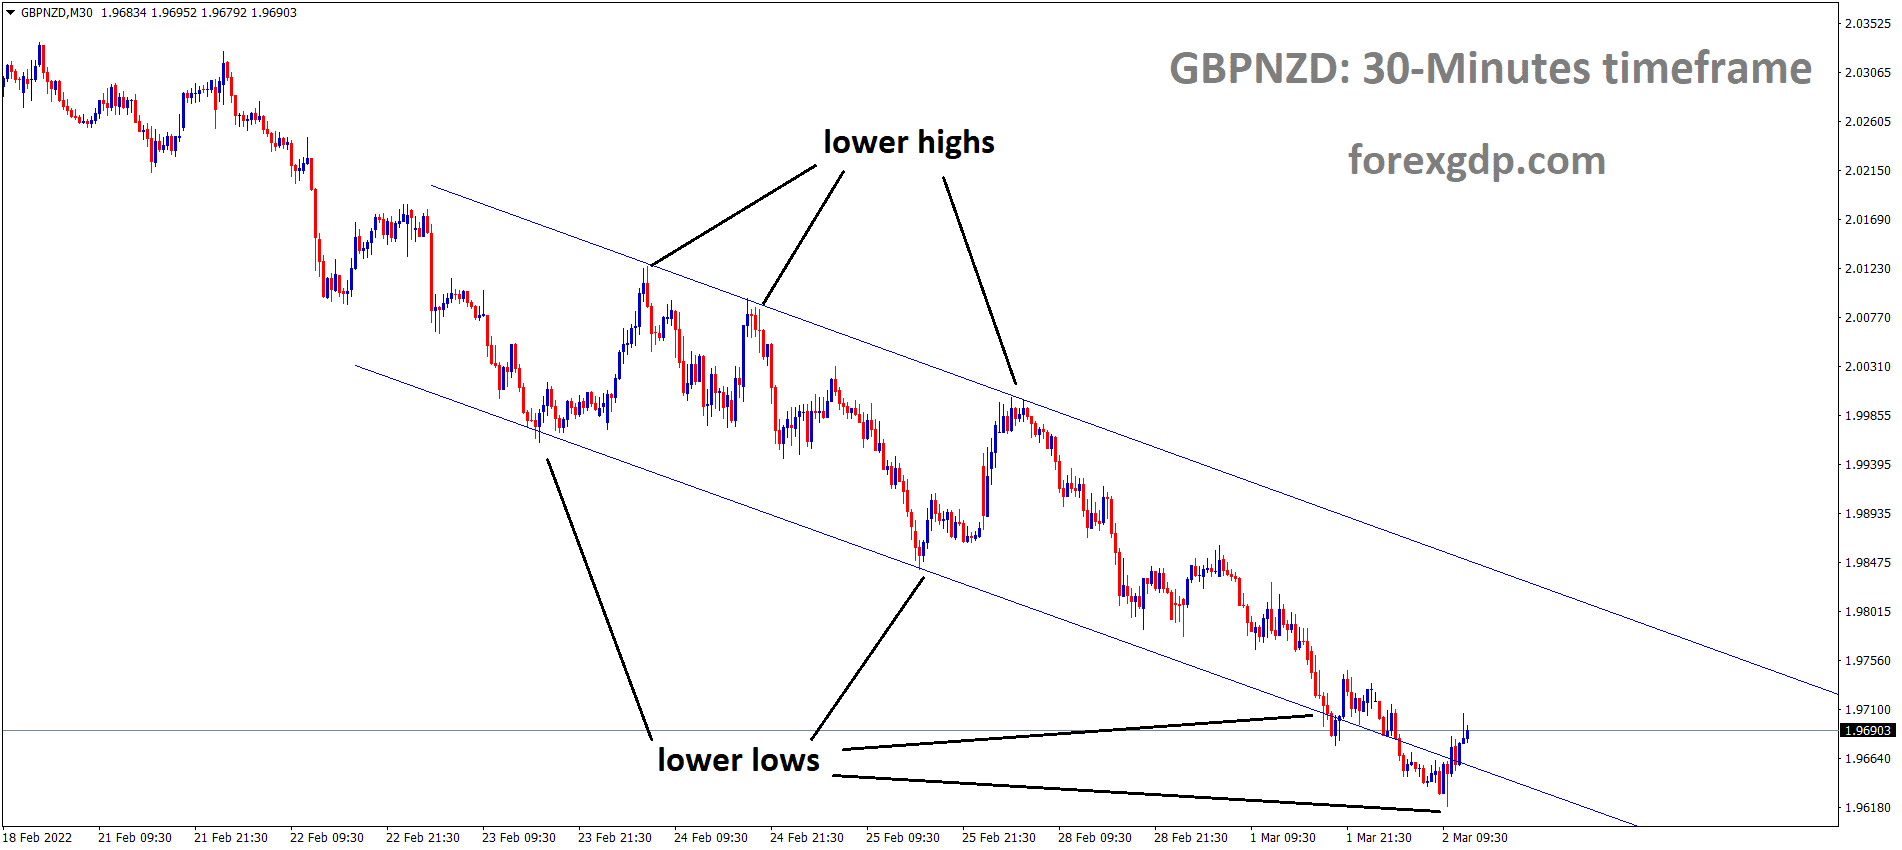 GBPNZD is moving in the Descending channel and the market has rebounded from the lower low area of the channel.